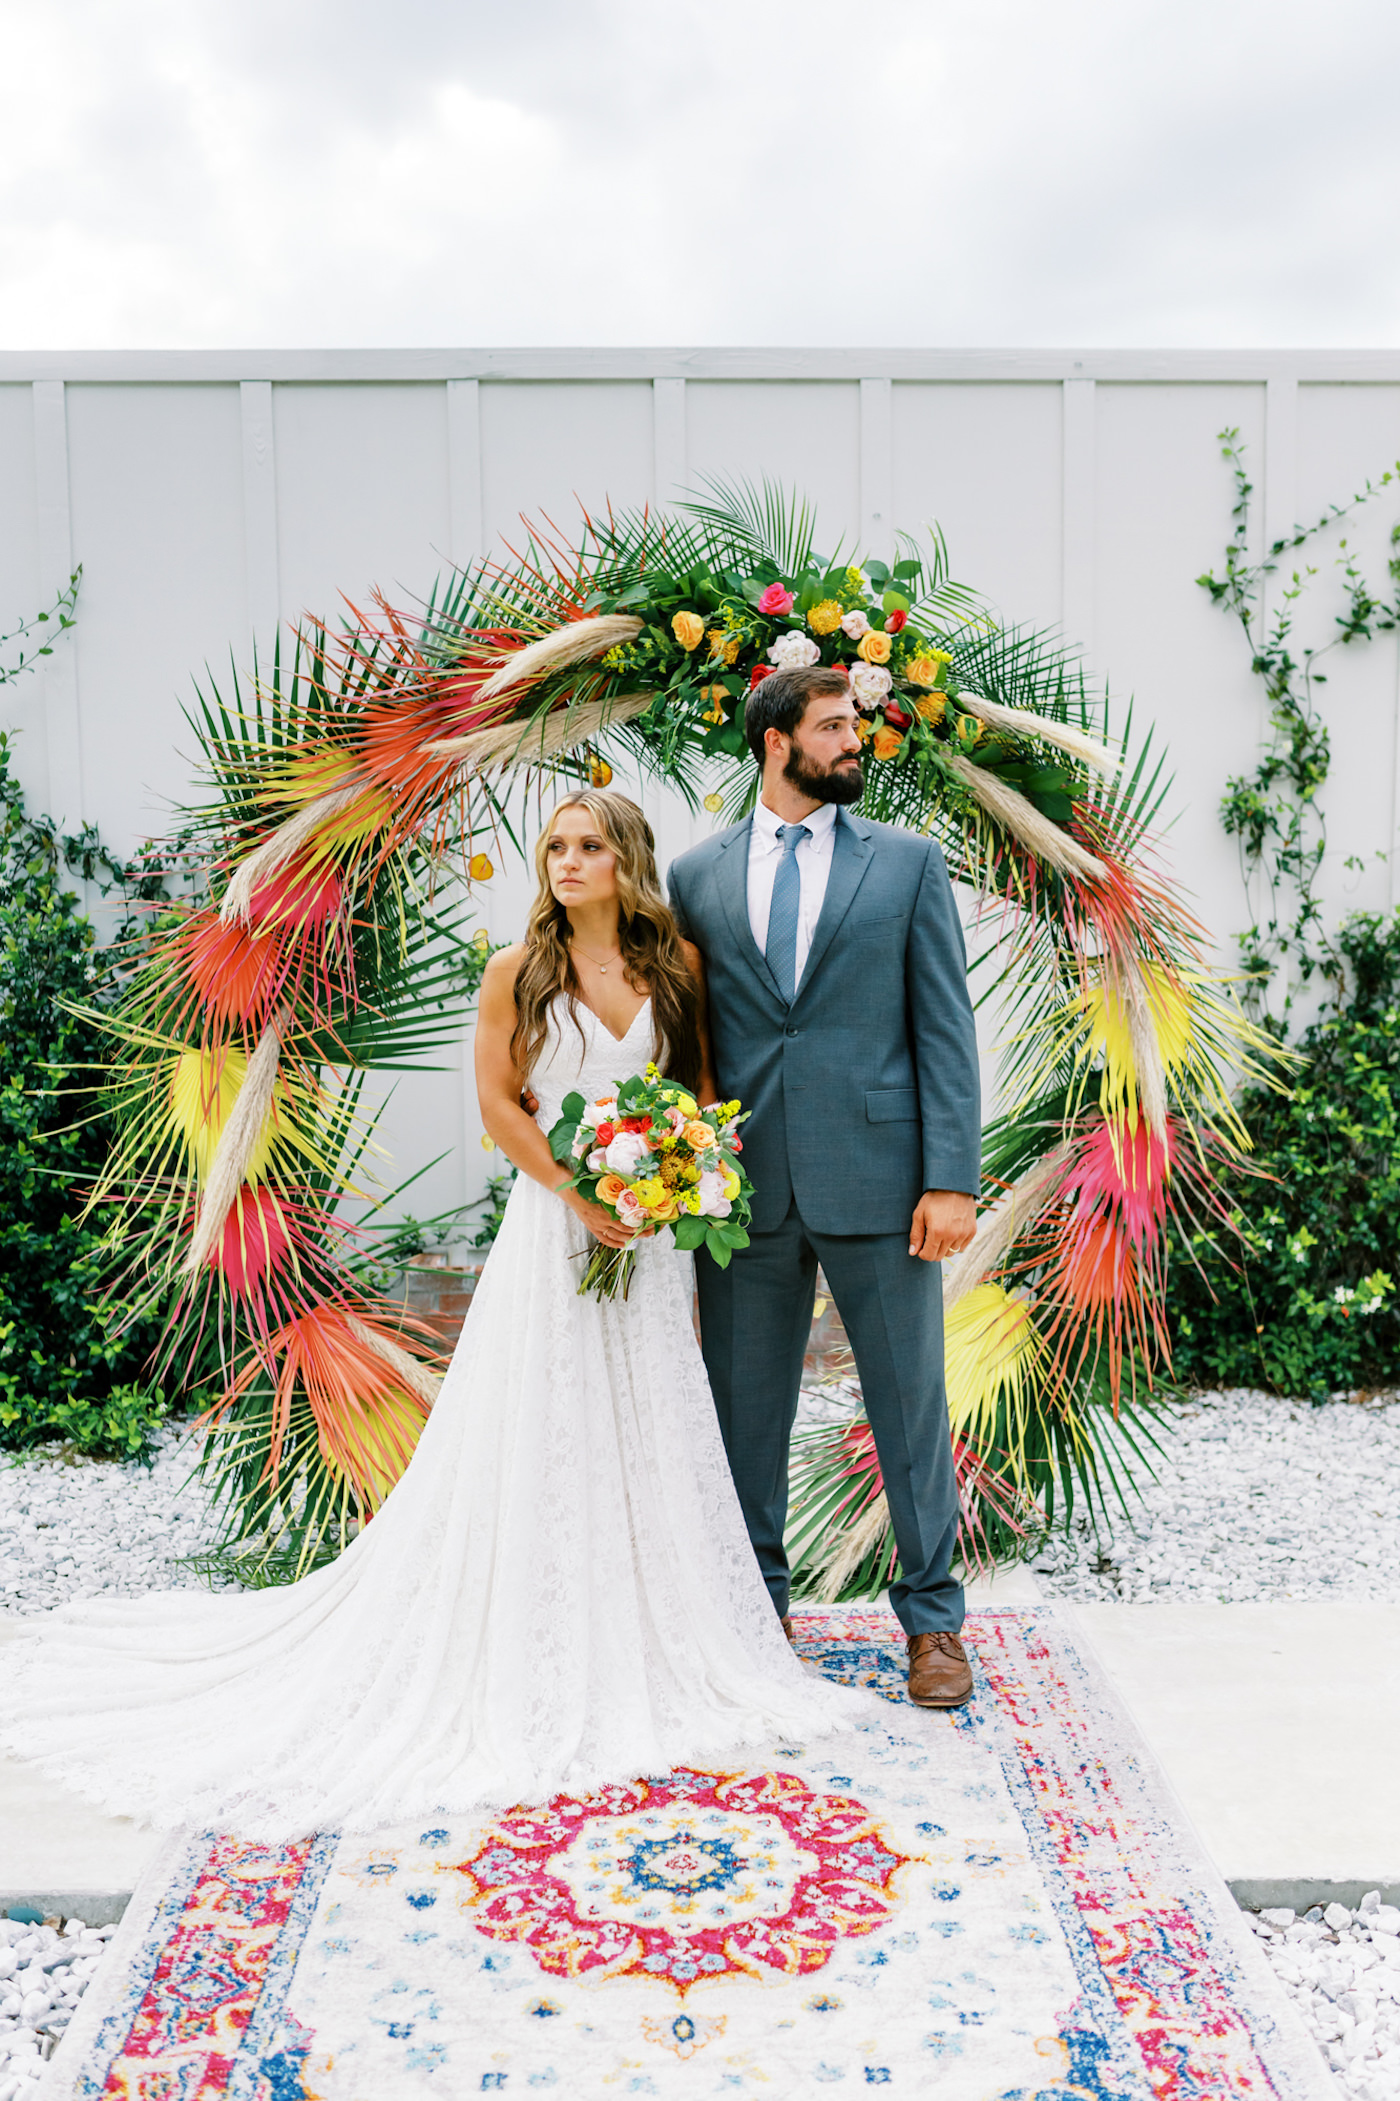 Tropical Florida Citrus Wedding Inspiration | Orange and Yellow Painted Palm Frond Leaf Round Moon Arch Ceremony Backdrop with Pampas Grass and Hanging Orange Slices | Bright Colorful Floral Arrangement with Orange and Pink Roses and Yellow Pincushion Protea | Ceremony Area Rug | Groom in Grey Suit